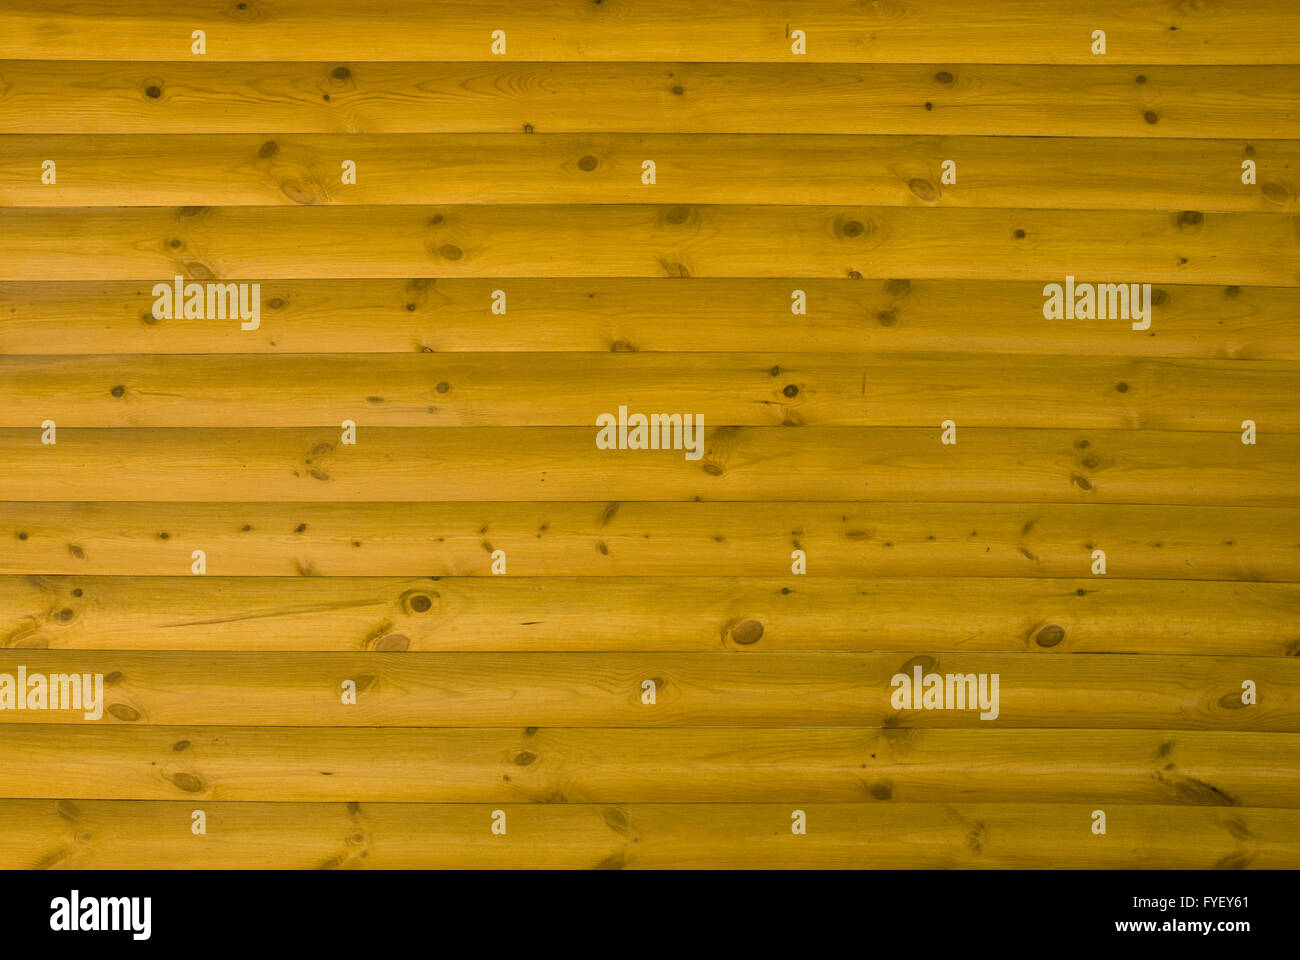 wood texture with natural patterns Stock Photo